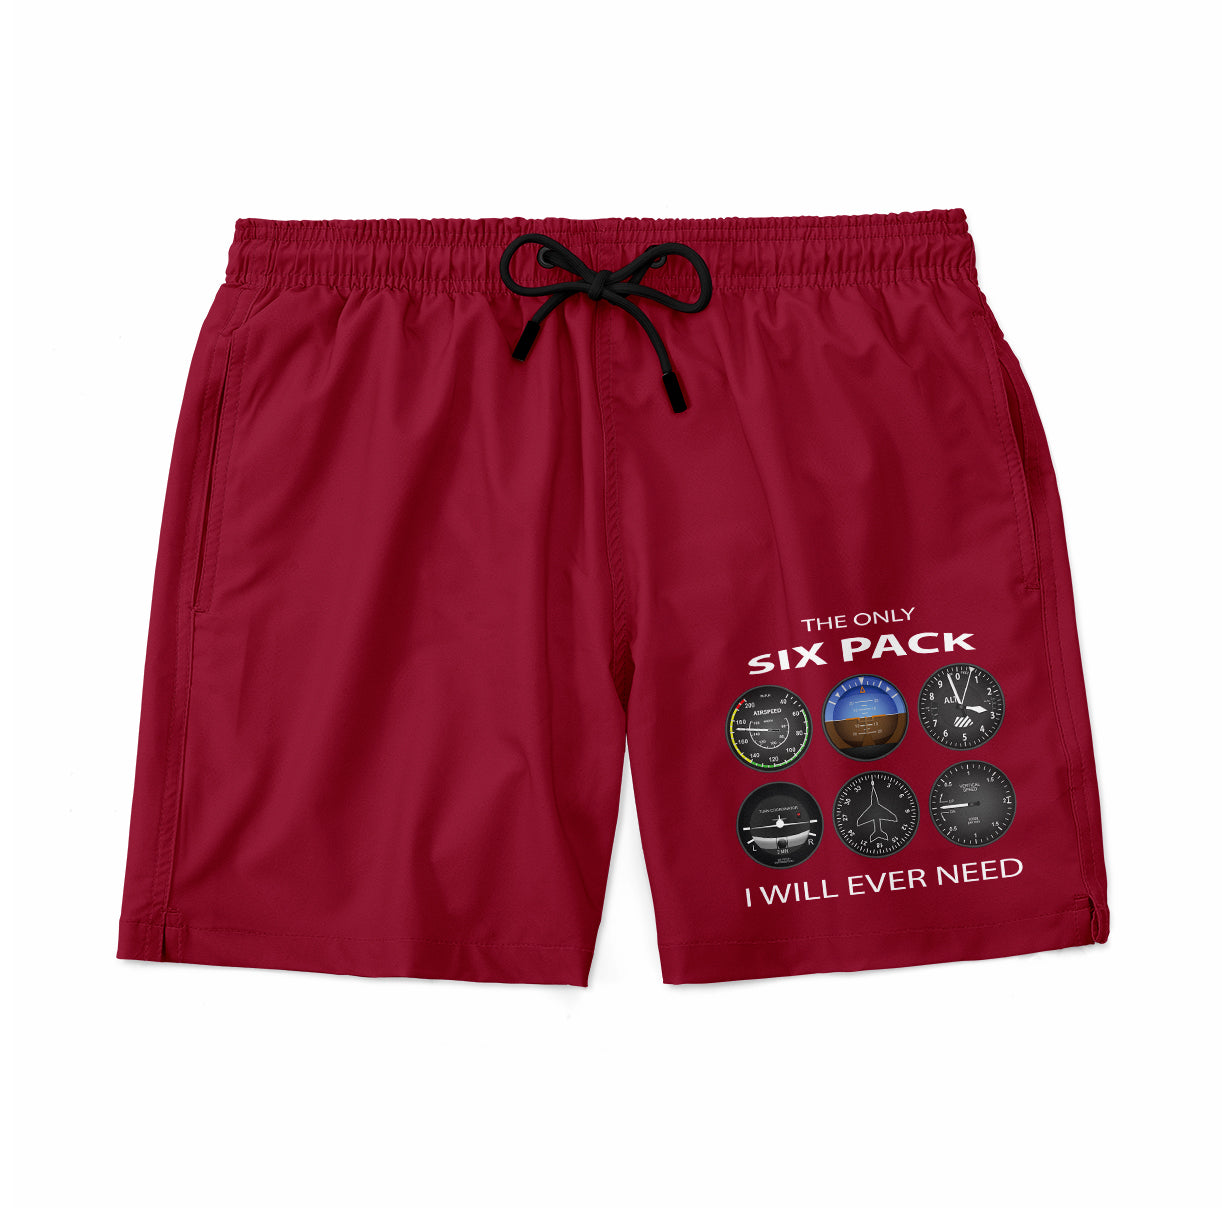 The Only Six Pack I Will Ever Need Designed Swim Trunks & Shorts